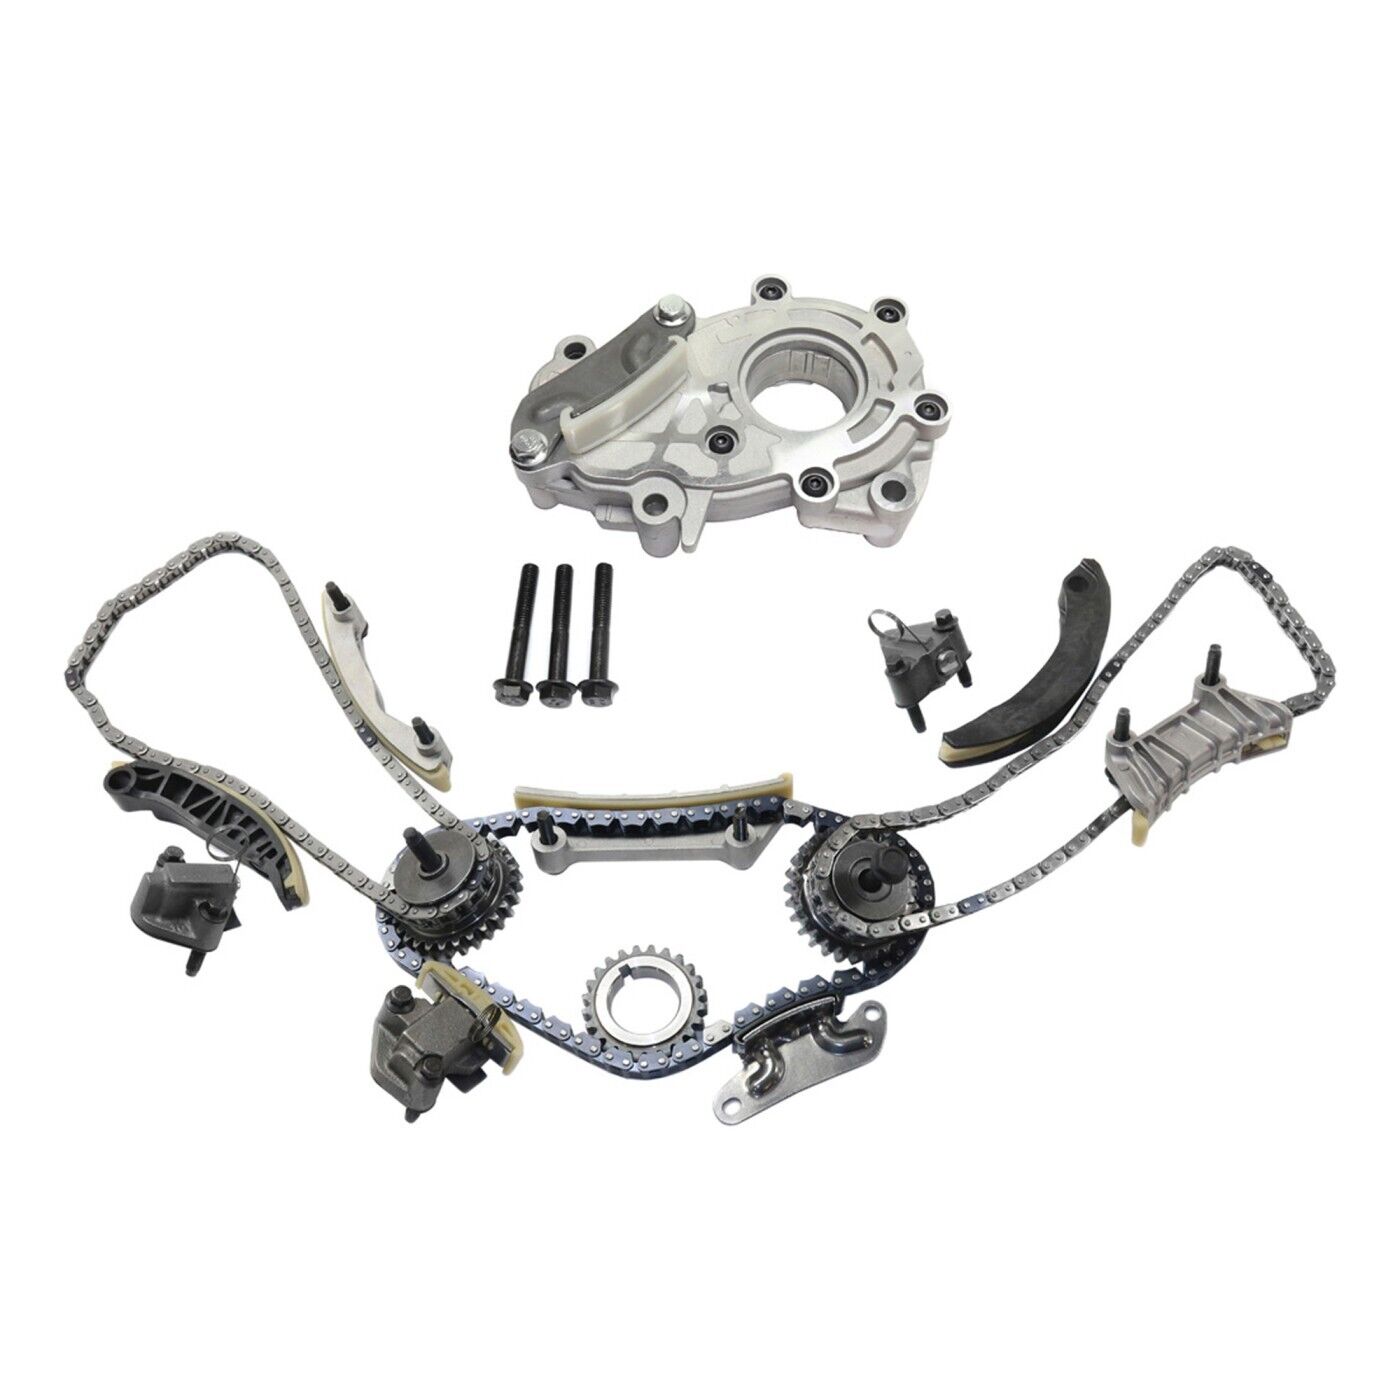 Timing Chain Kit For 2005-06 Buick LaCrosse With Water Pump and Oil Pump